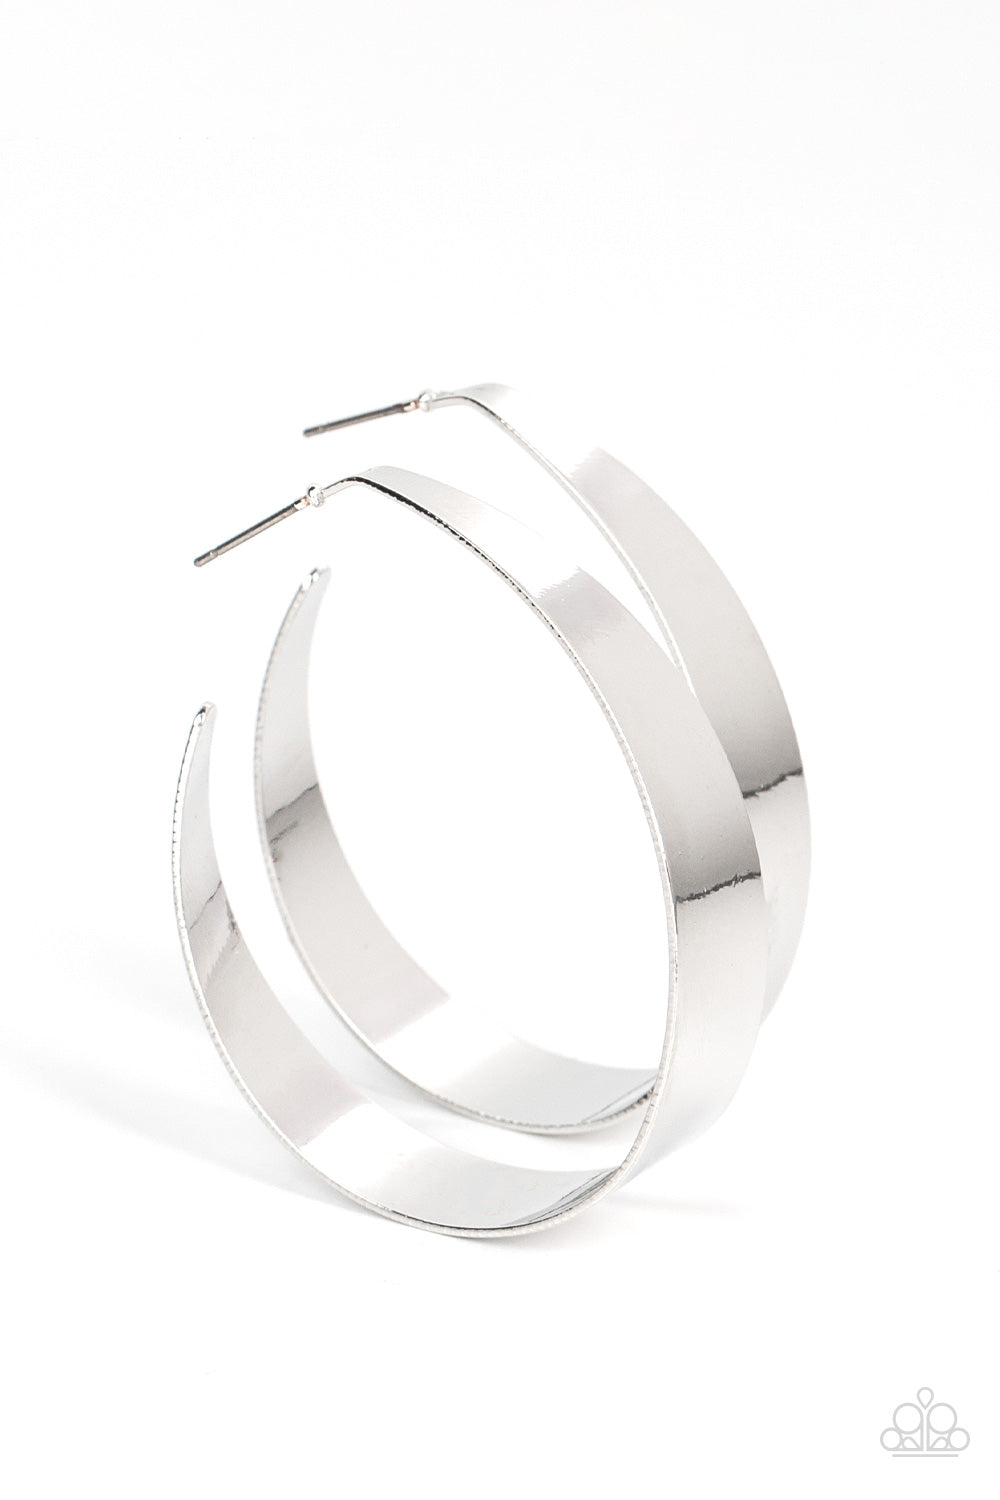 Flat Out Fashionable Silver Hoop Earring - Paparazzi Accessories  A flat silver ribbon loops into a voluminous hoop, catching and refracting the light with the curve. Earring attaches to a standard post fitting. Hoop measures approximately 1 3/4" in diameter.  Sold as one pair of hoop earrings.